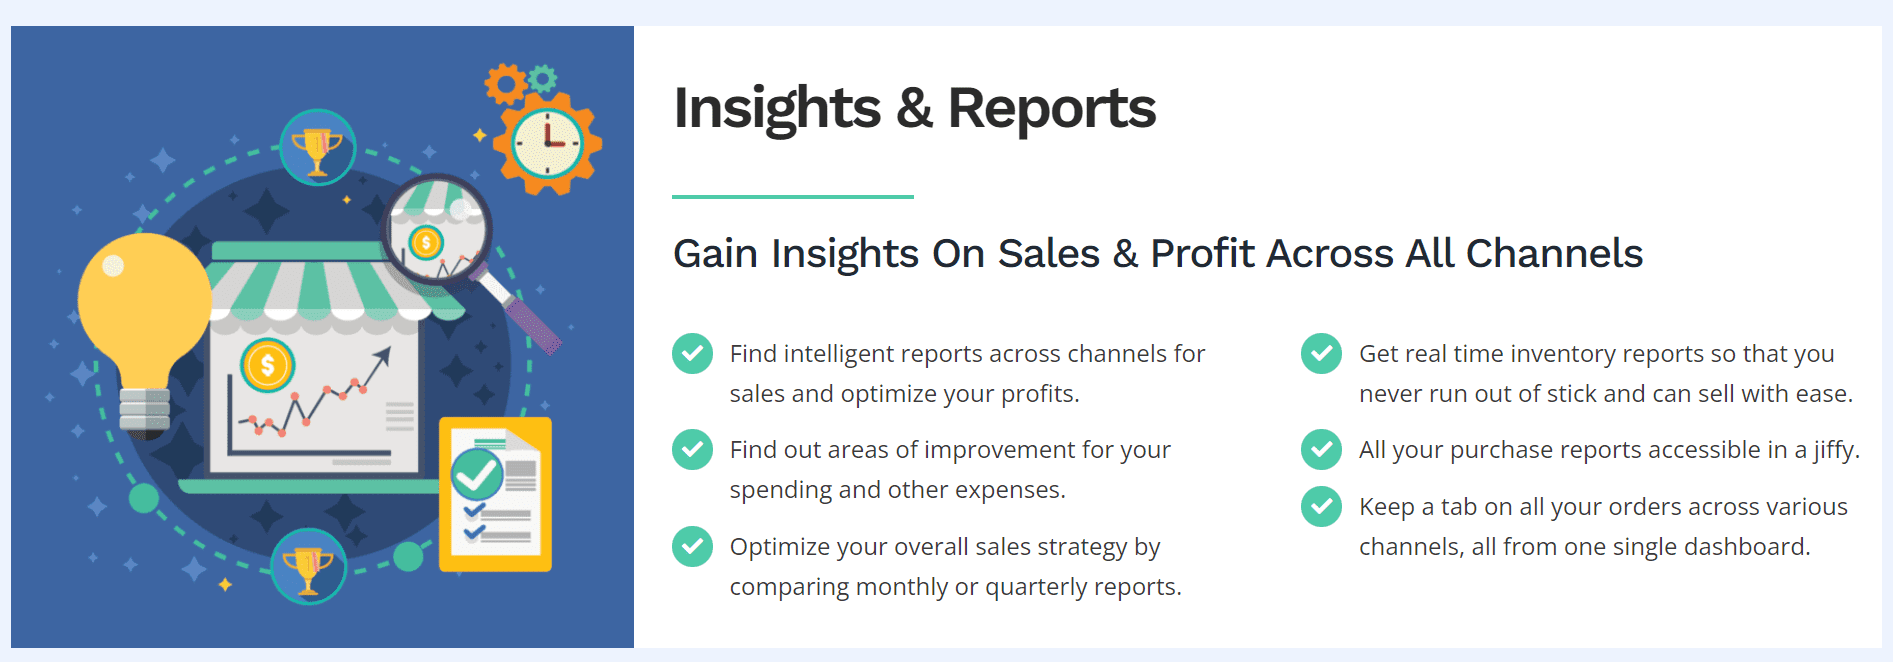 insights n reports